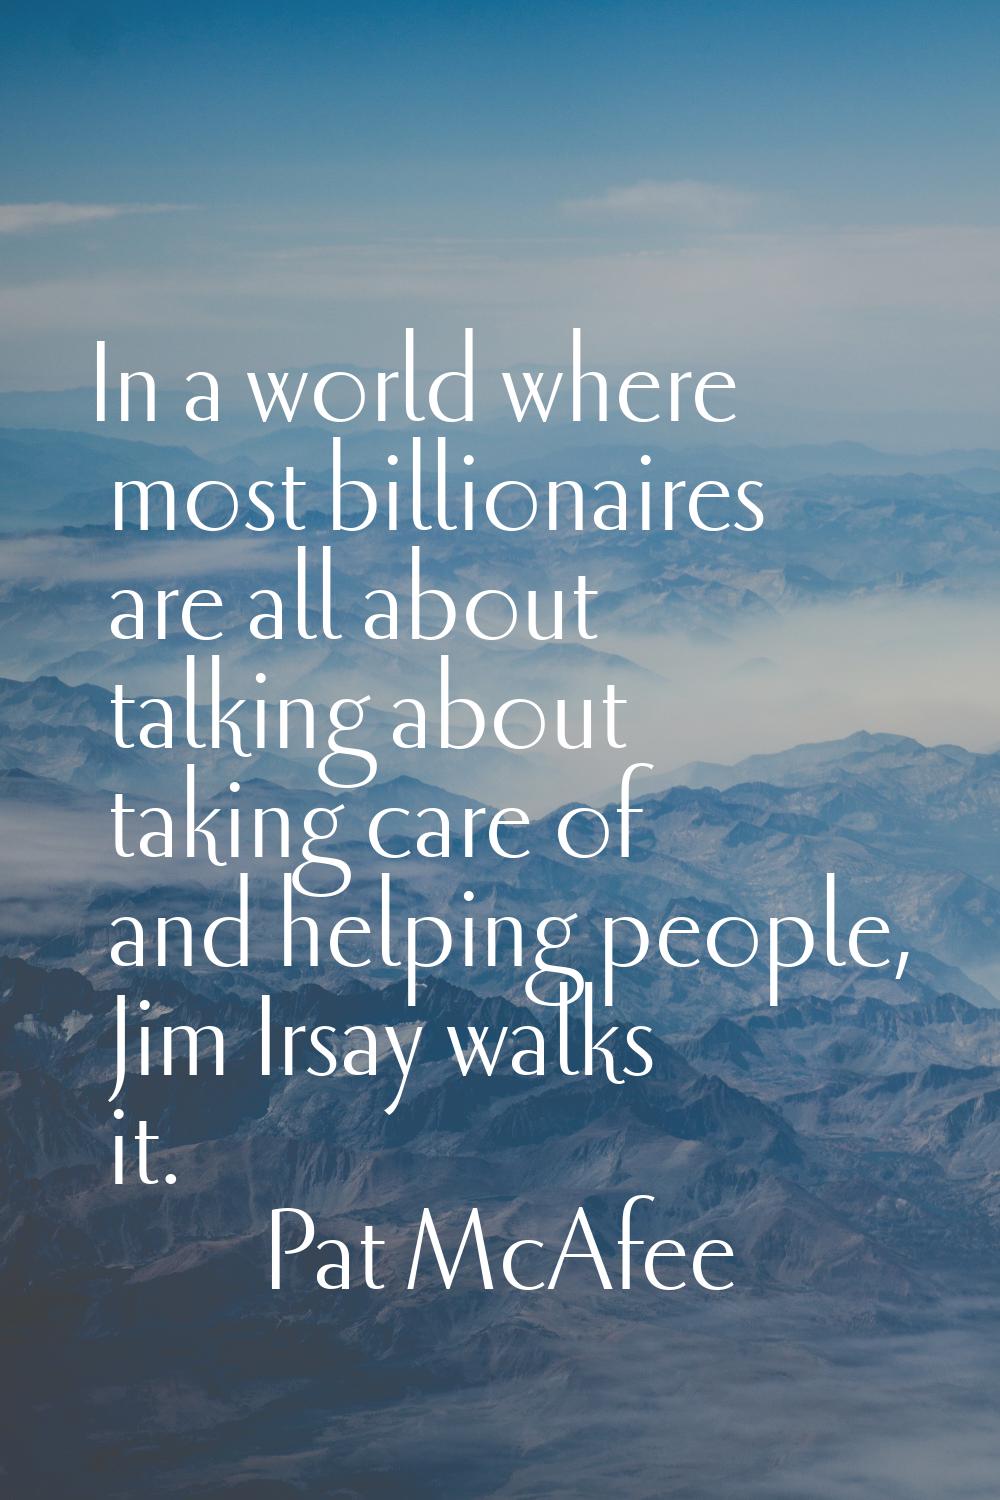 In a world where most billionaires are all about talking about taking care of and helping people, J